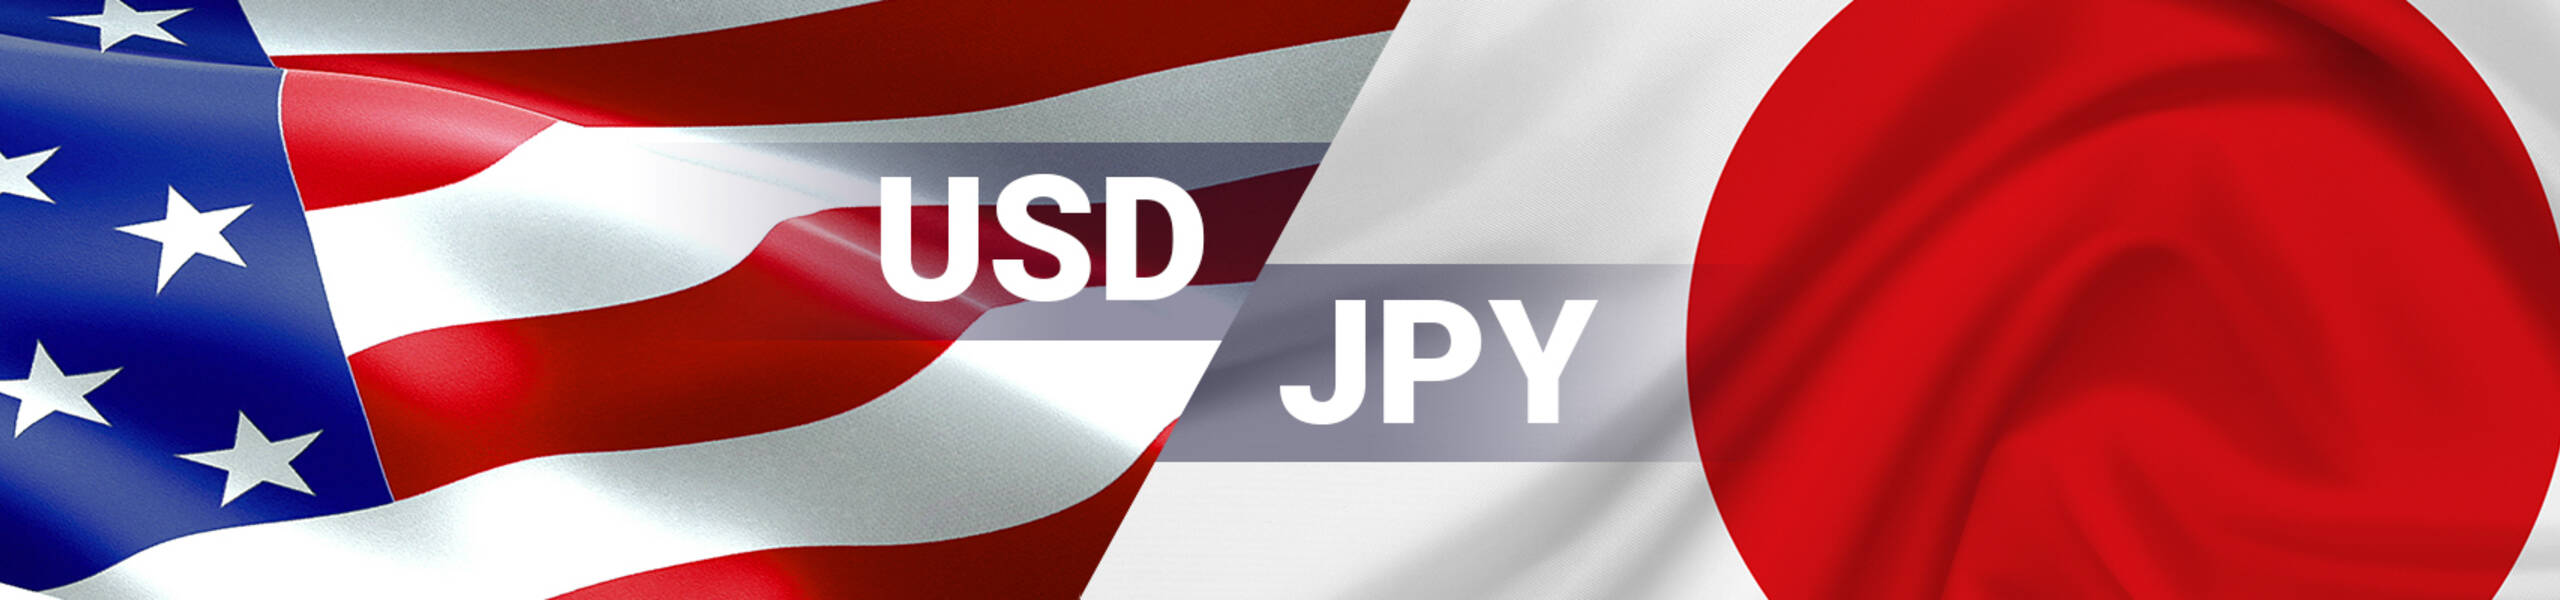 FX:為替 USD/JPY Dailyレポート 2017/06/23